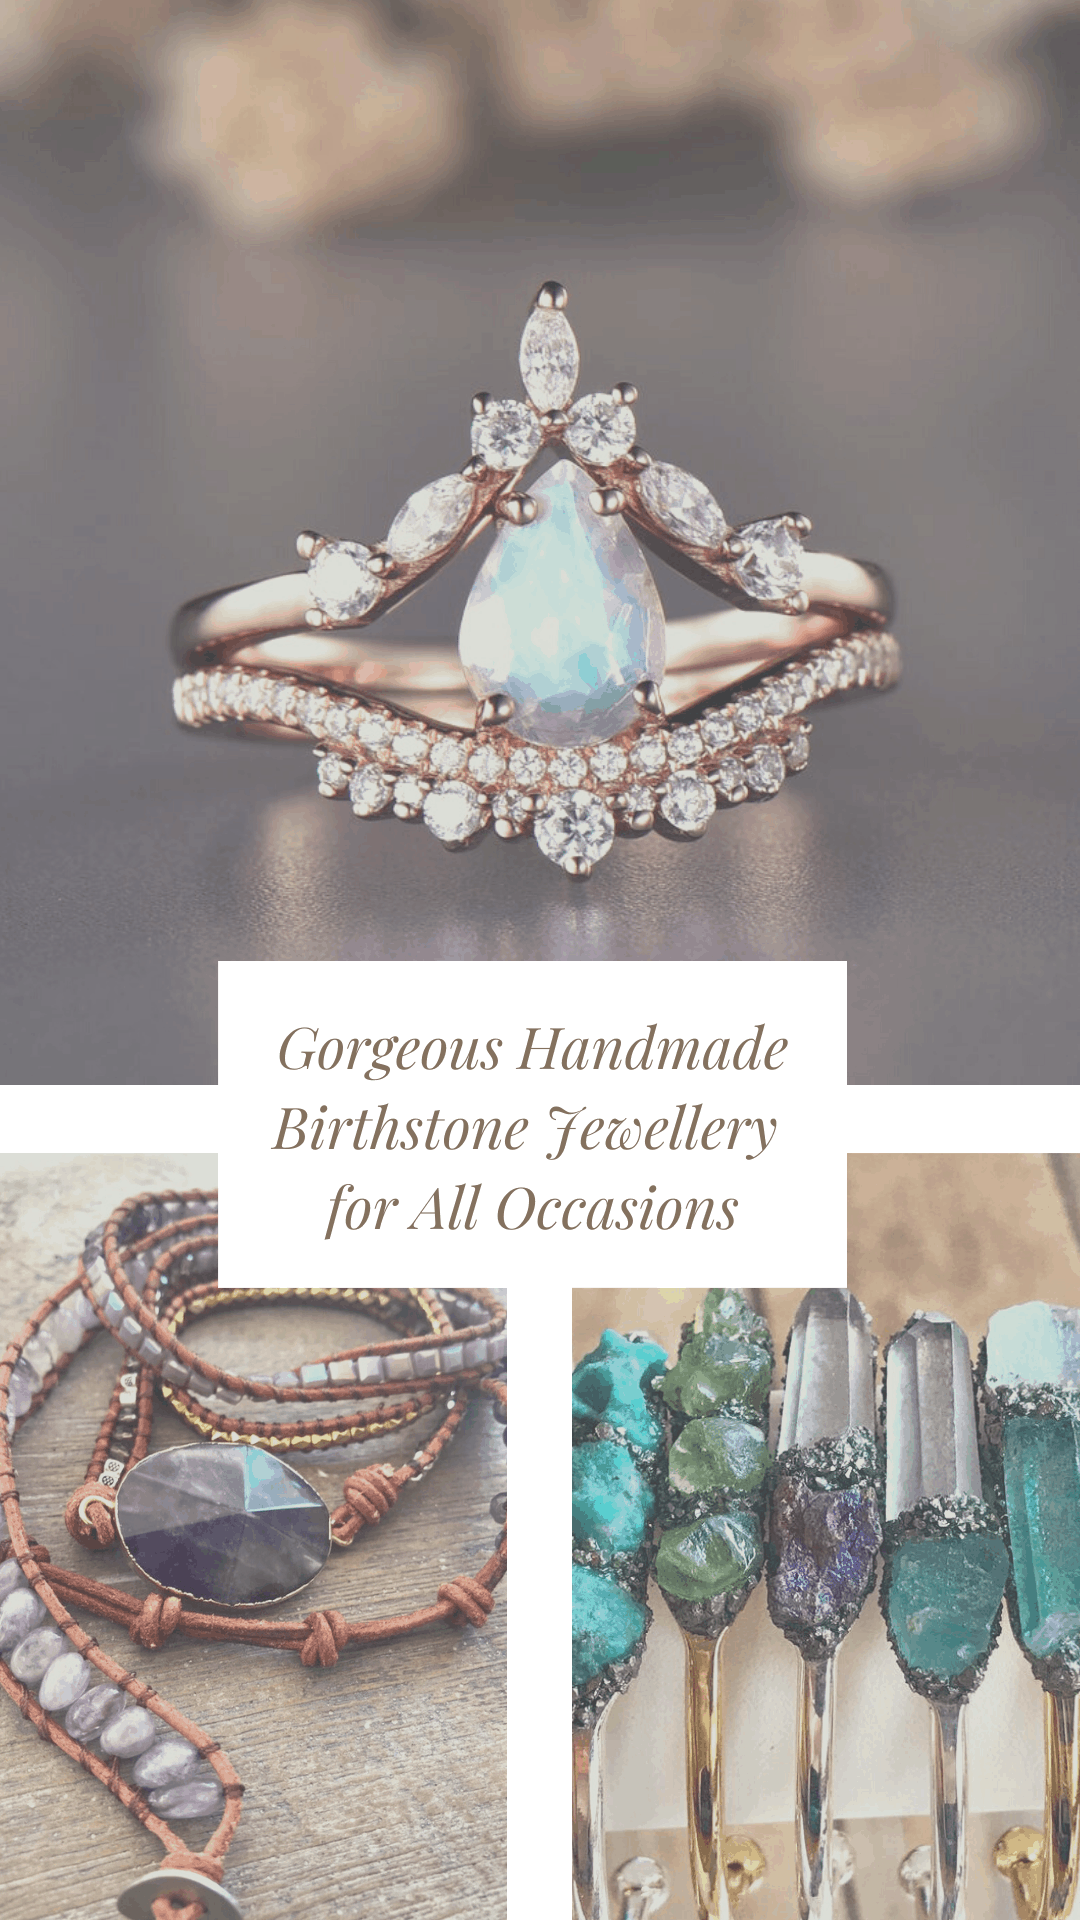 These handmade birthstone jewellery pieces are just gorgeous! They make wonderful gifts for the women in your life. Oh and the engagement rings are breathtaking!